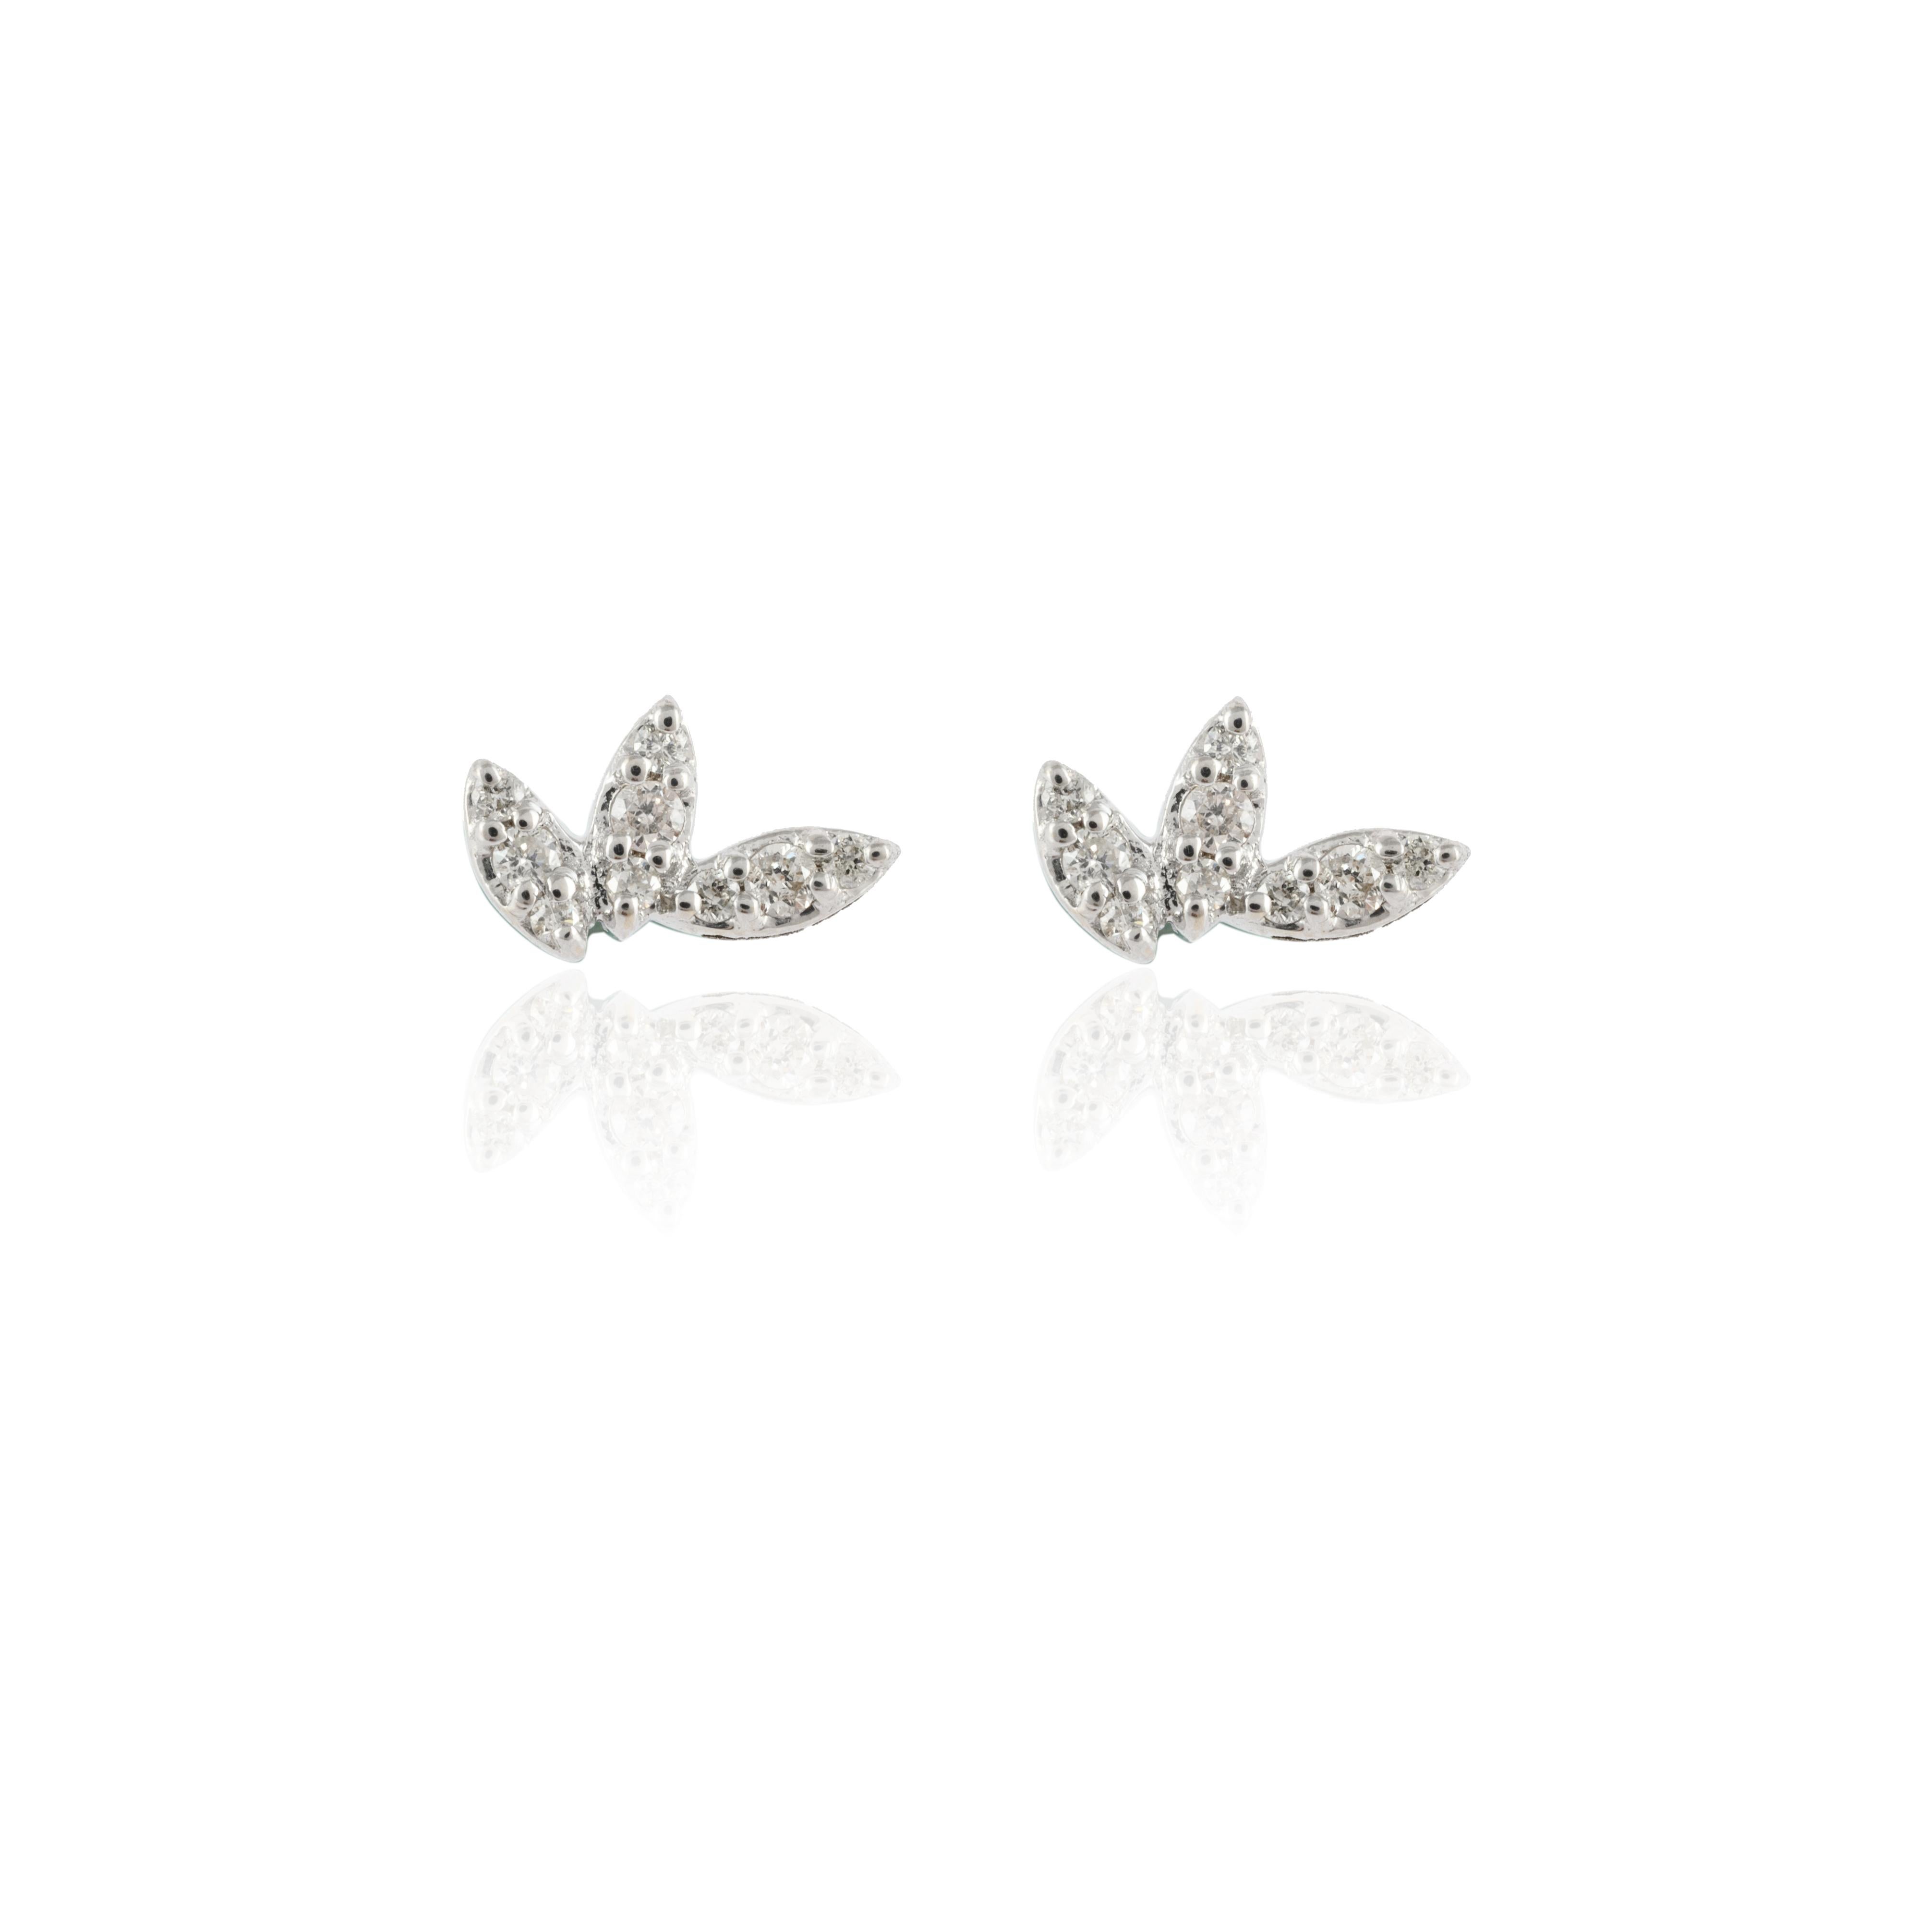 Dainty Diamond Leaf Earrings in 18K Gold to make a statement with your look. You shall need stud earrings to make a statement with your look. These earrings create a sparkling, luxurious look featuring round cut diamonds.
April birthstone diamond